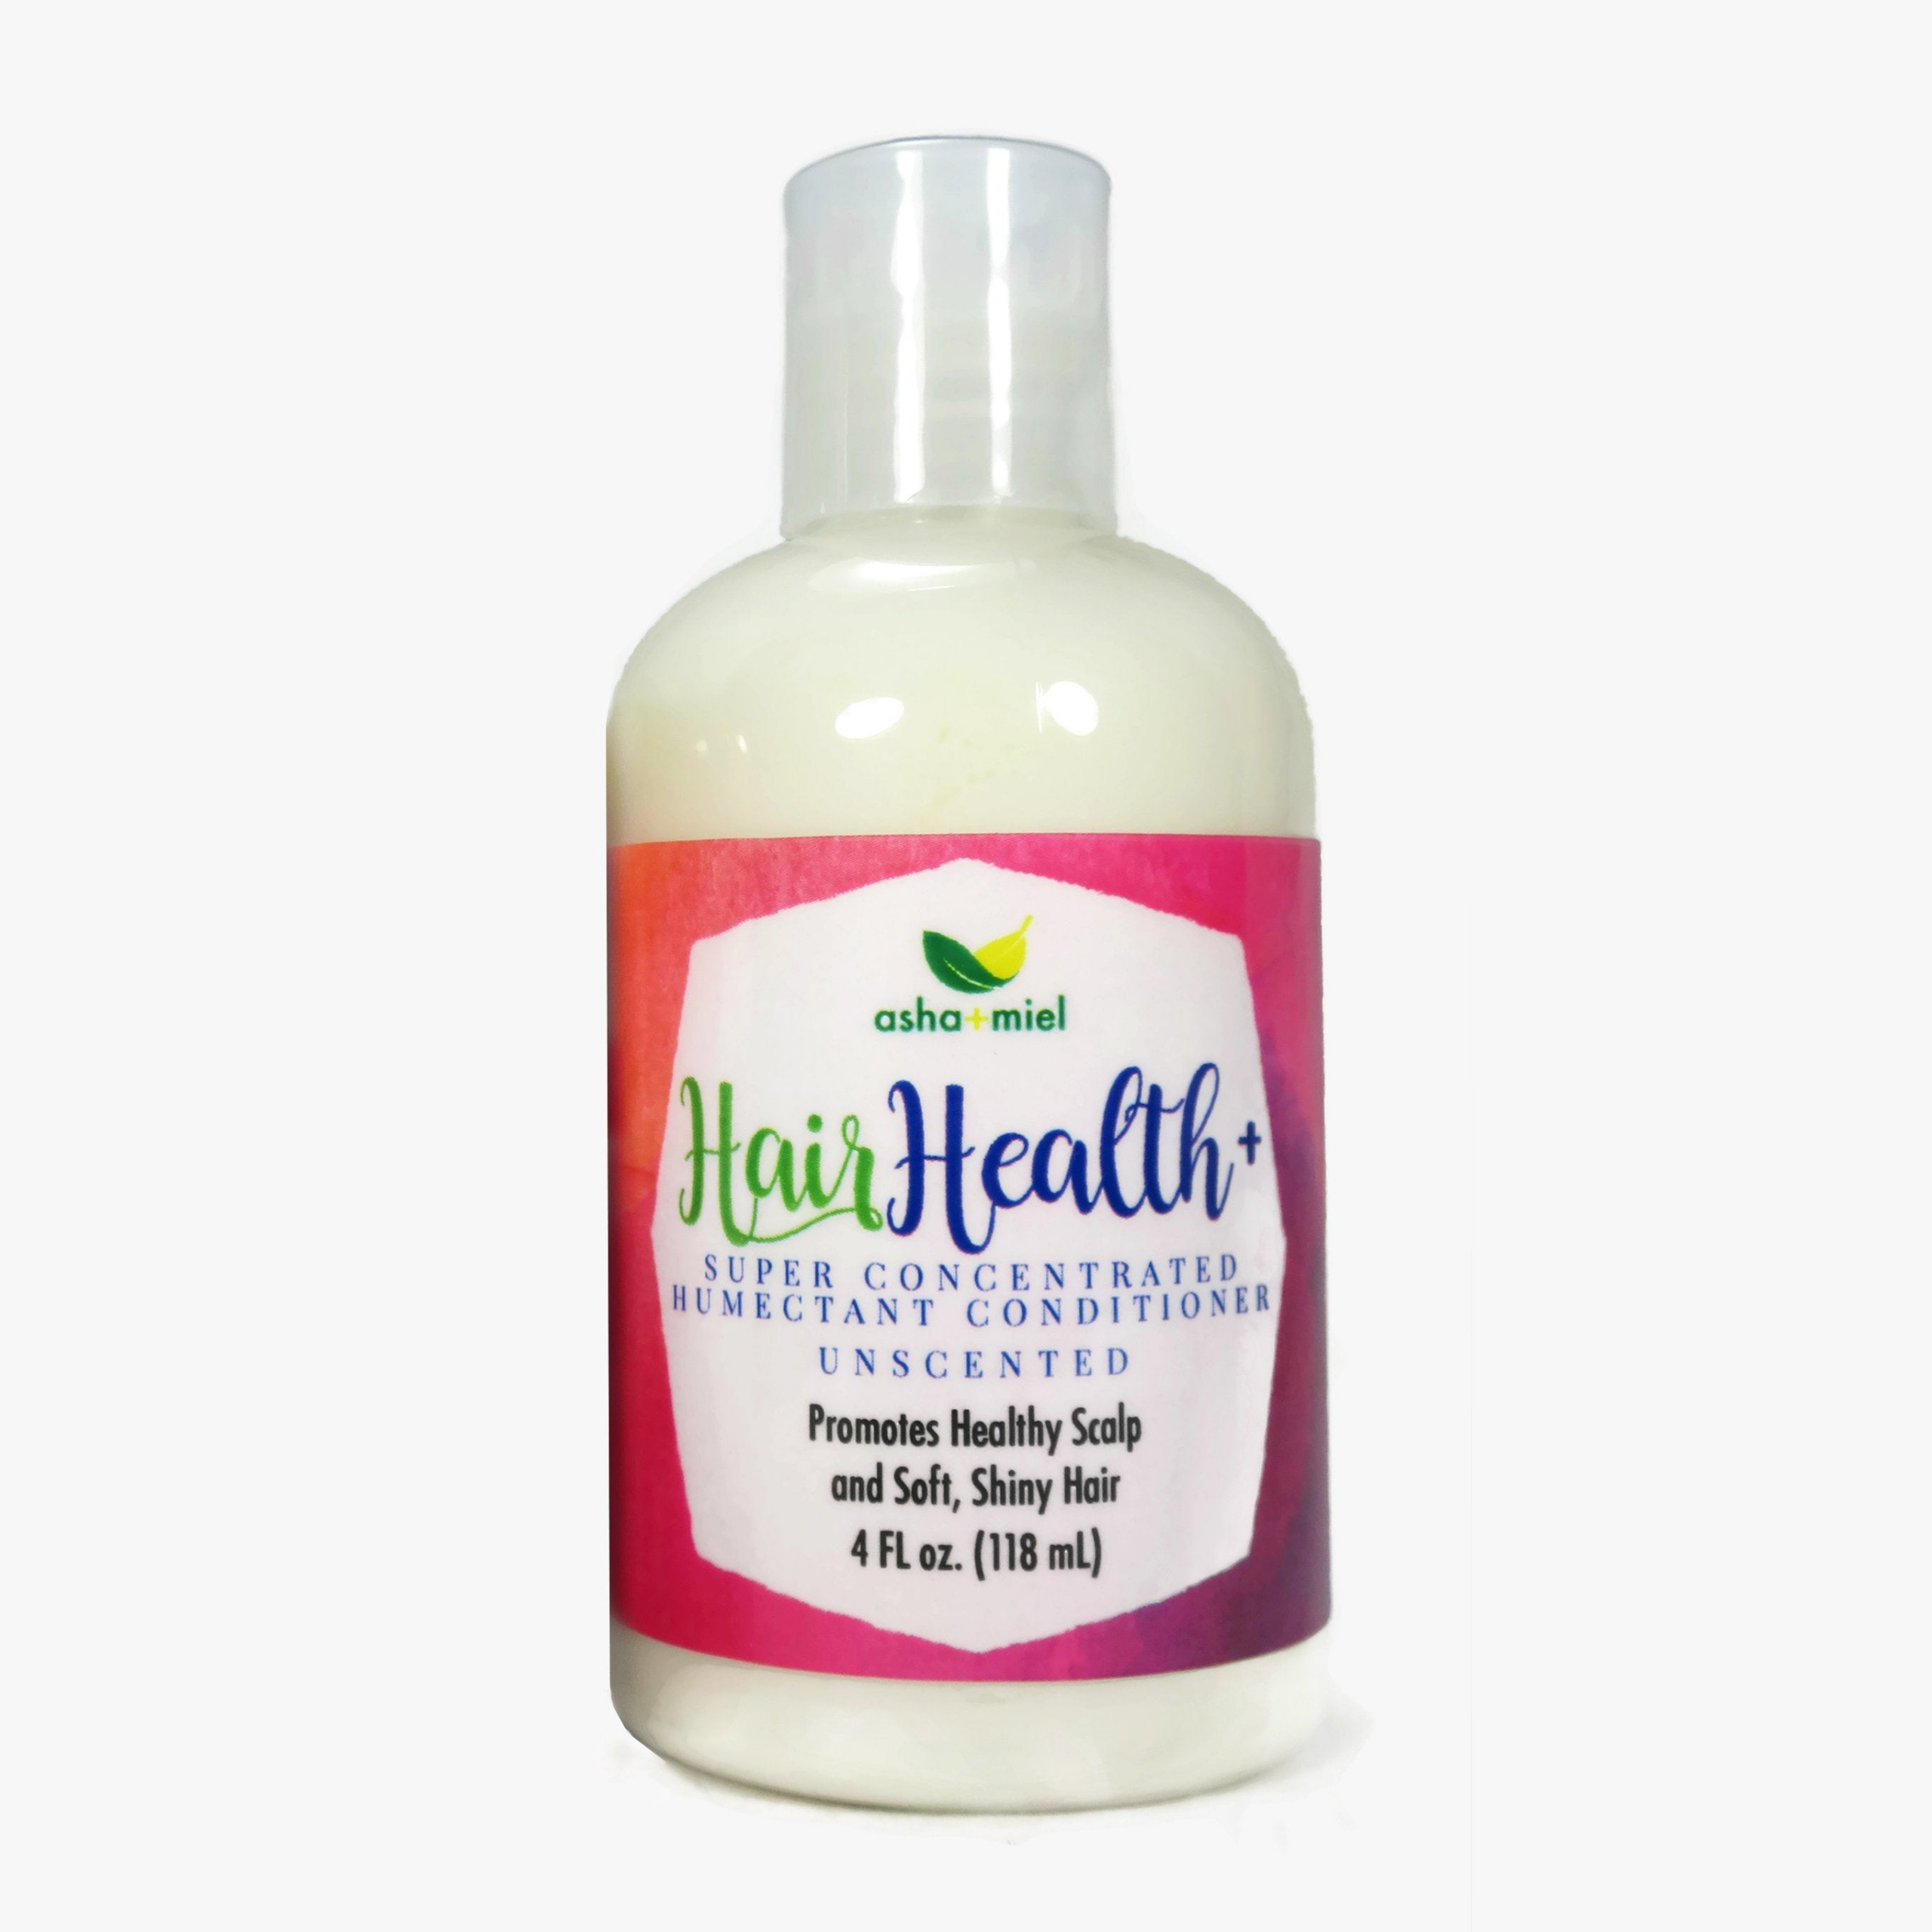 4 oz HairHealth+ Super Concentrated Humectant Herbal Hair Conditioner with 28 hair growth herbs and oils